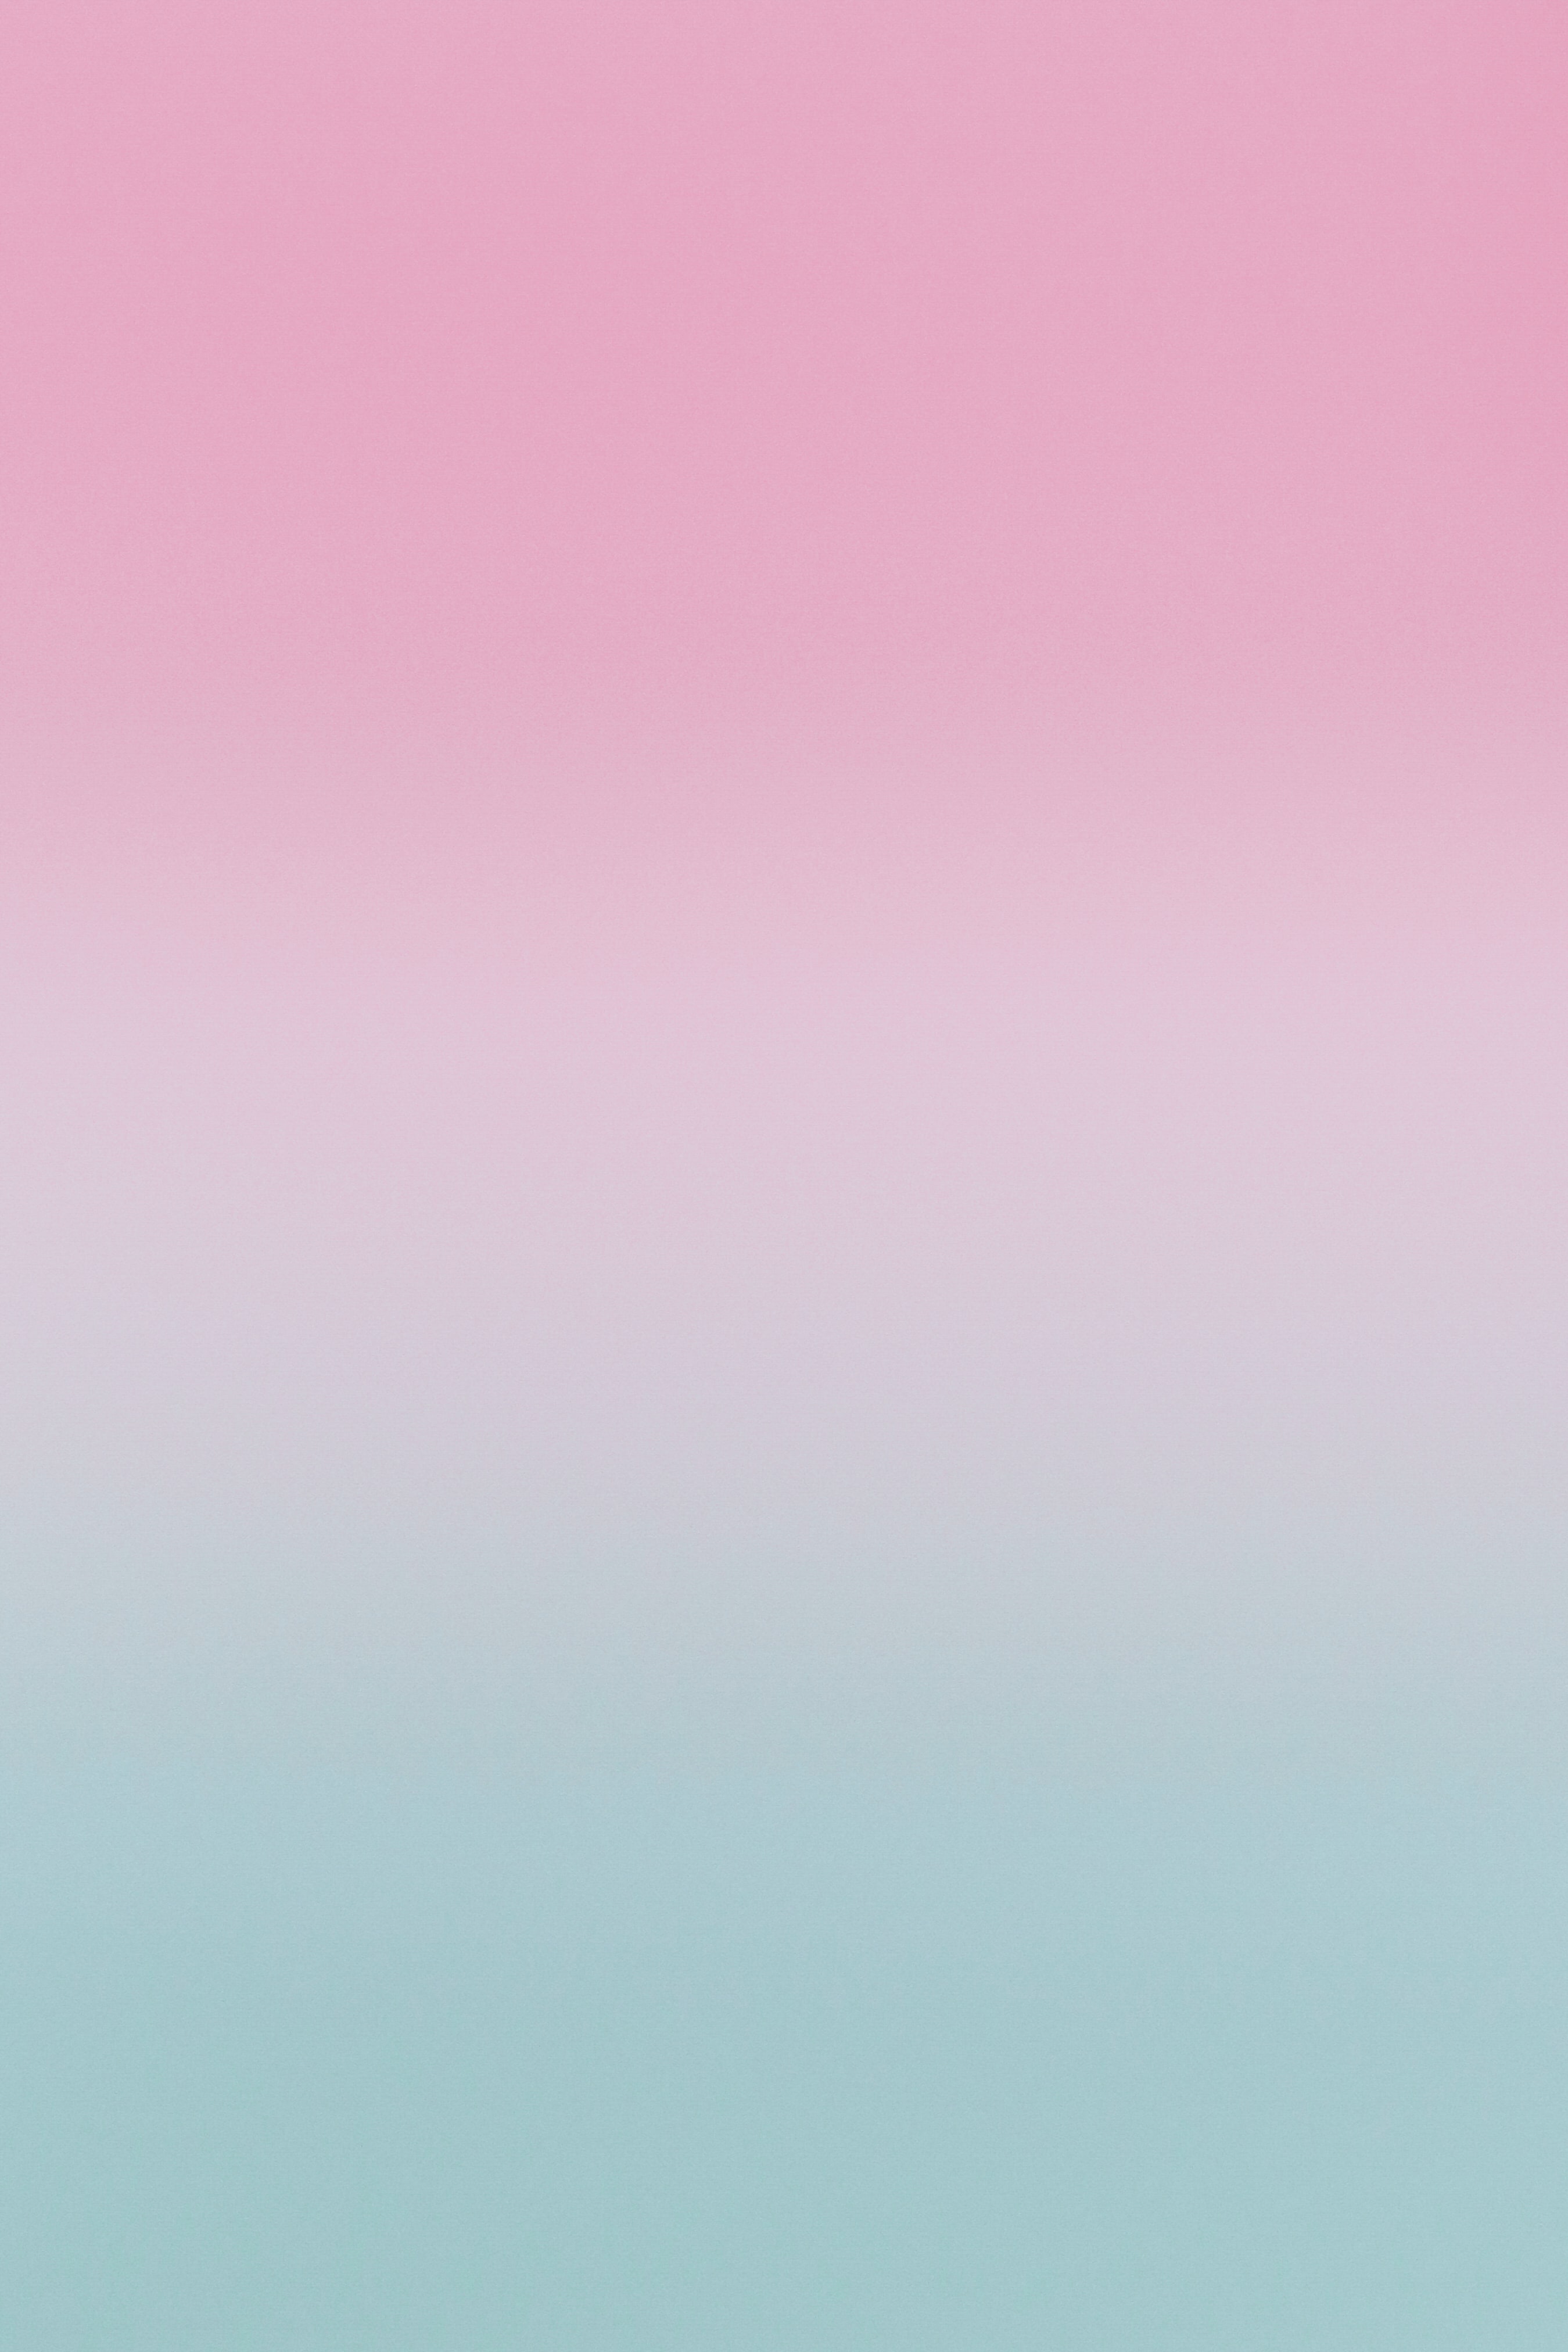 pink, blur, gradient, blue, abstract, smooth HD wallpaper